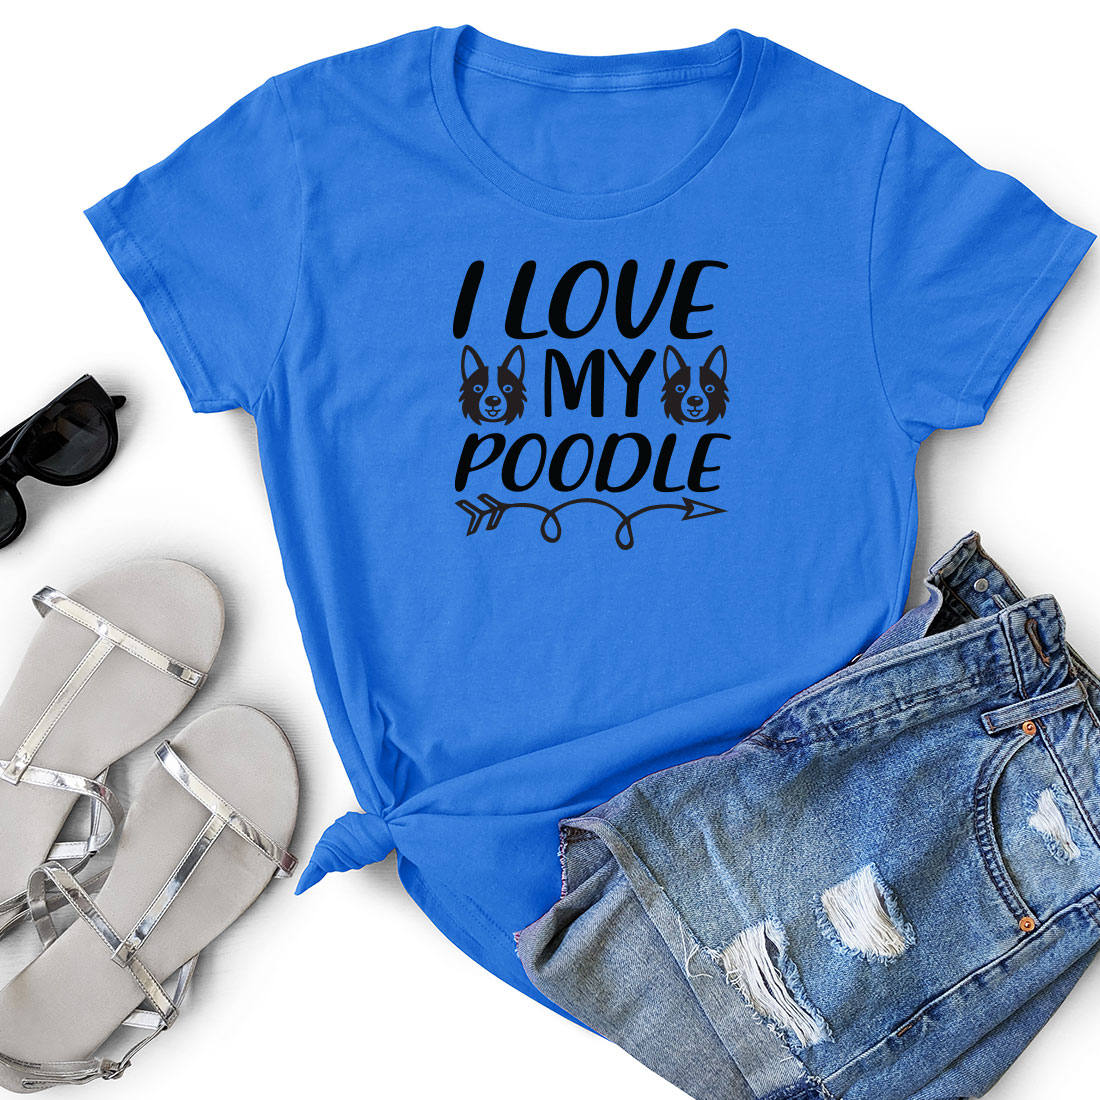 T - shirt that says i love my poodle on it.